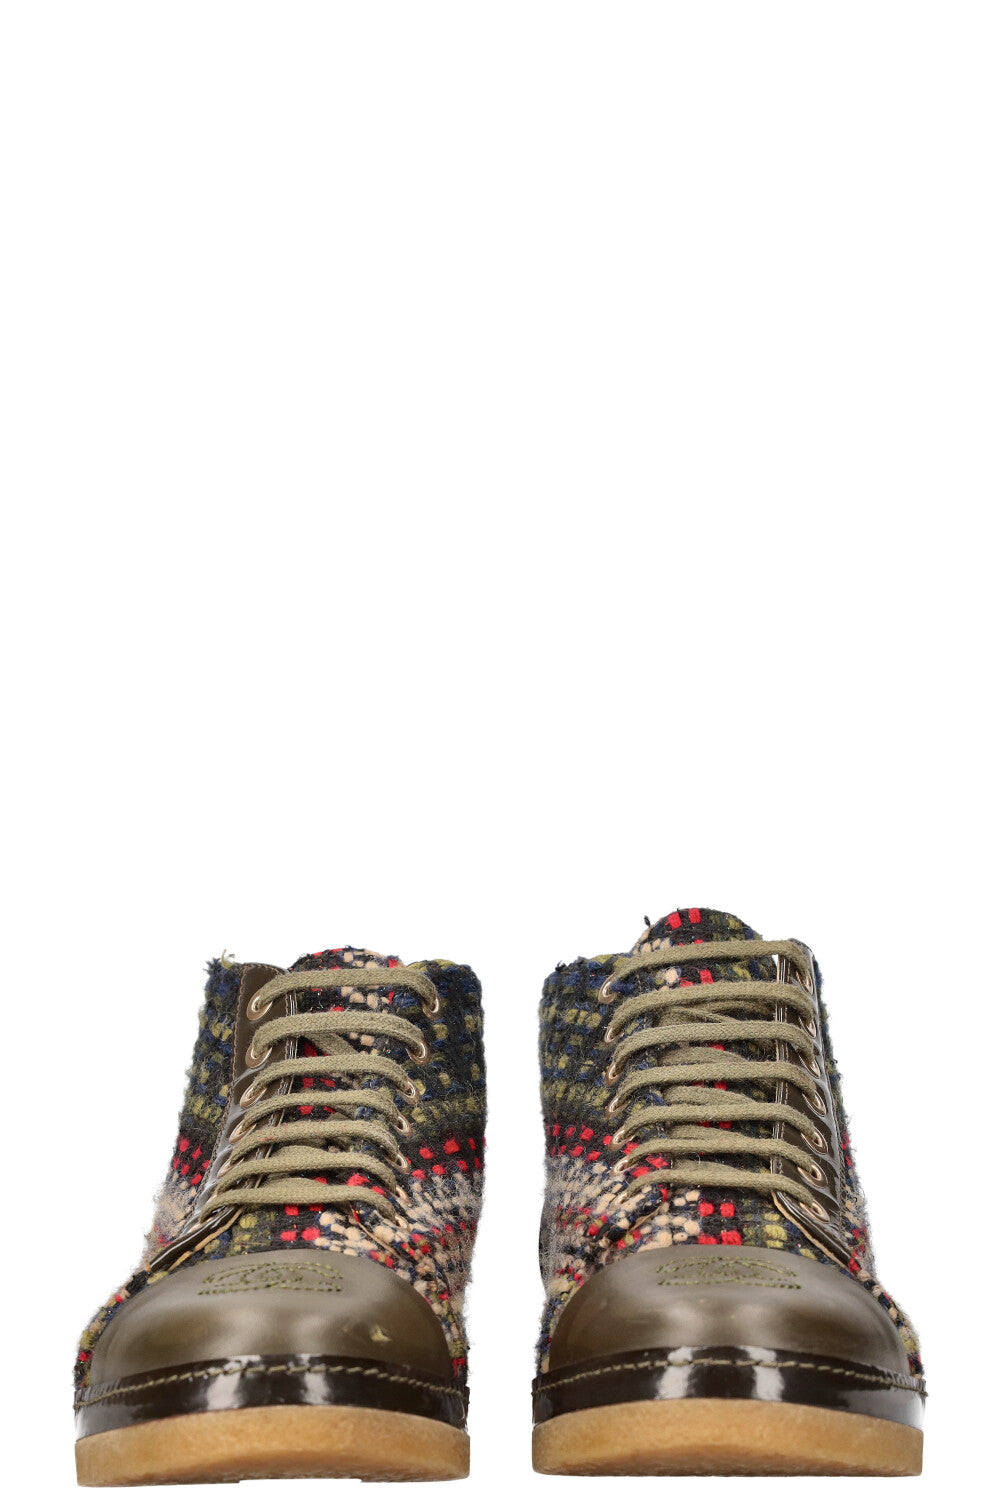 CHANEL Boots Tweed Green and Red